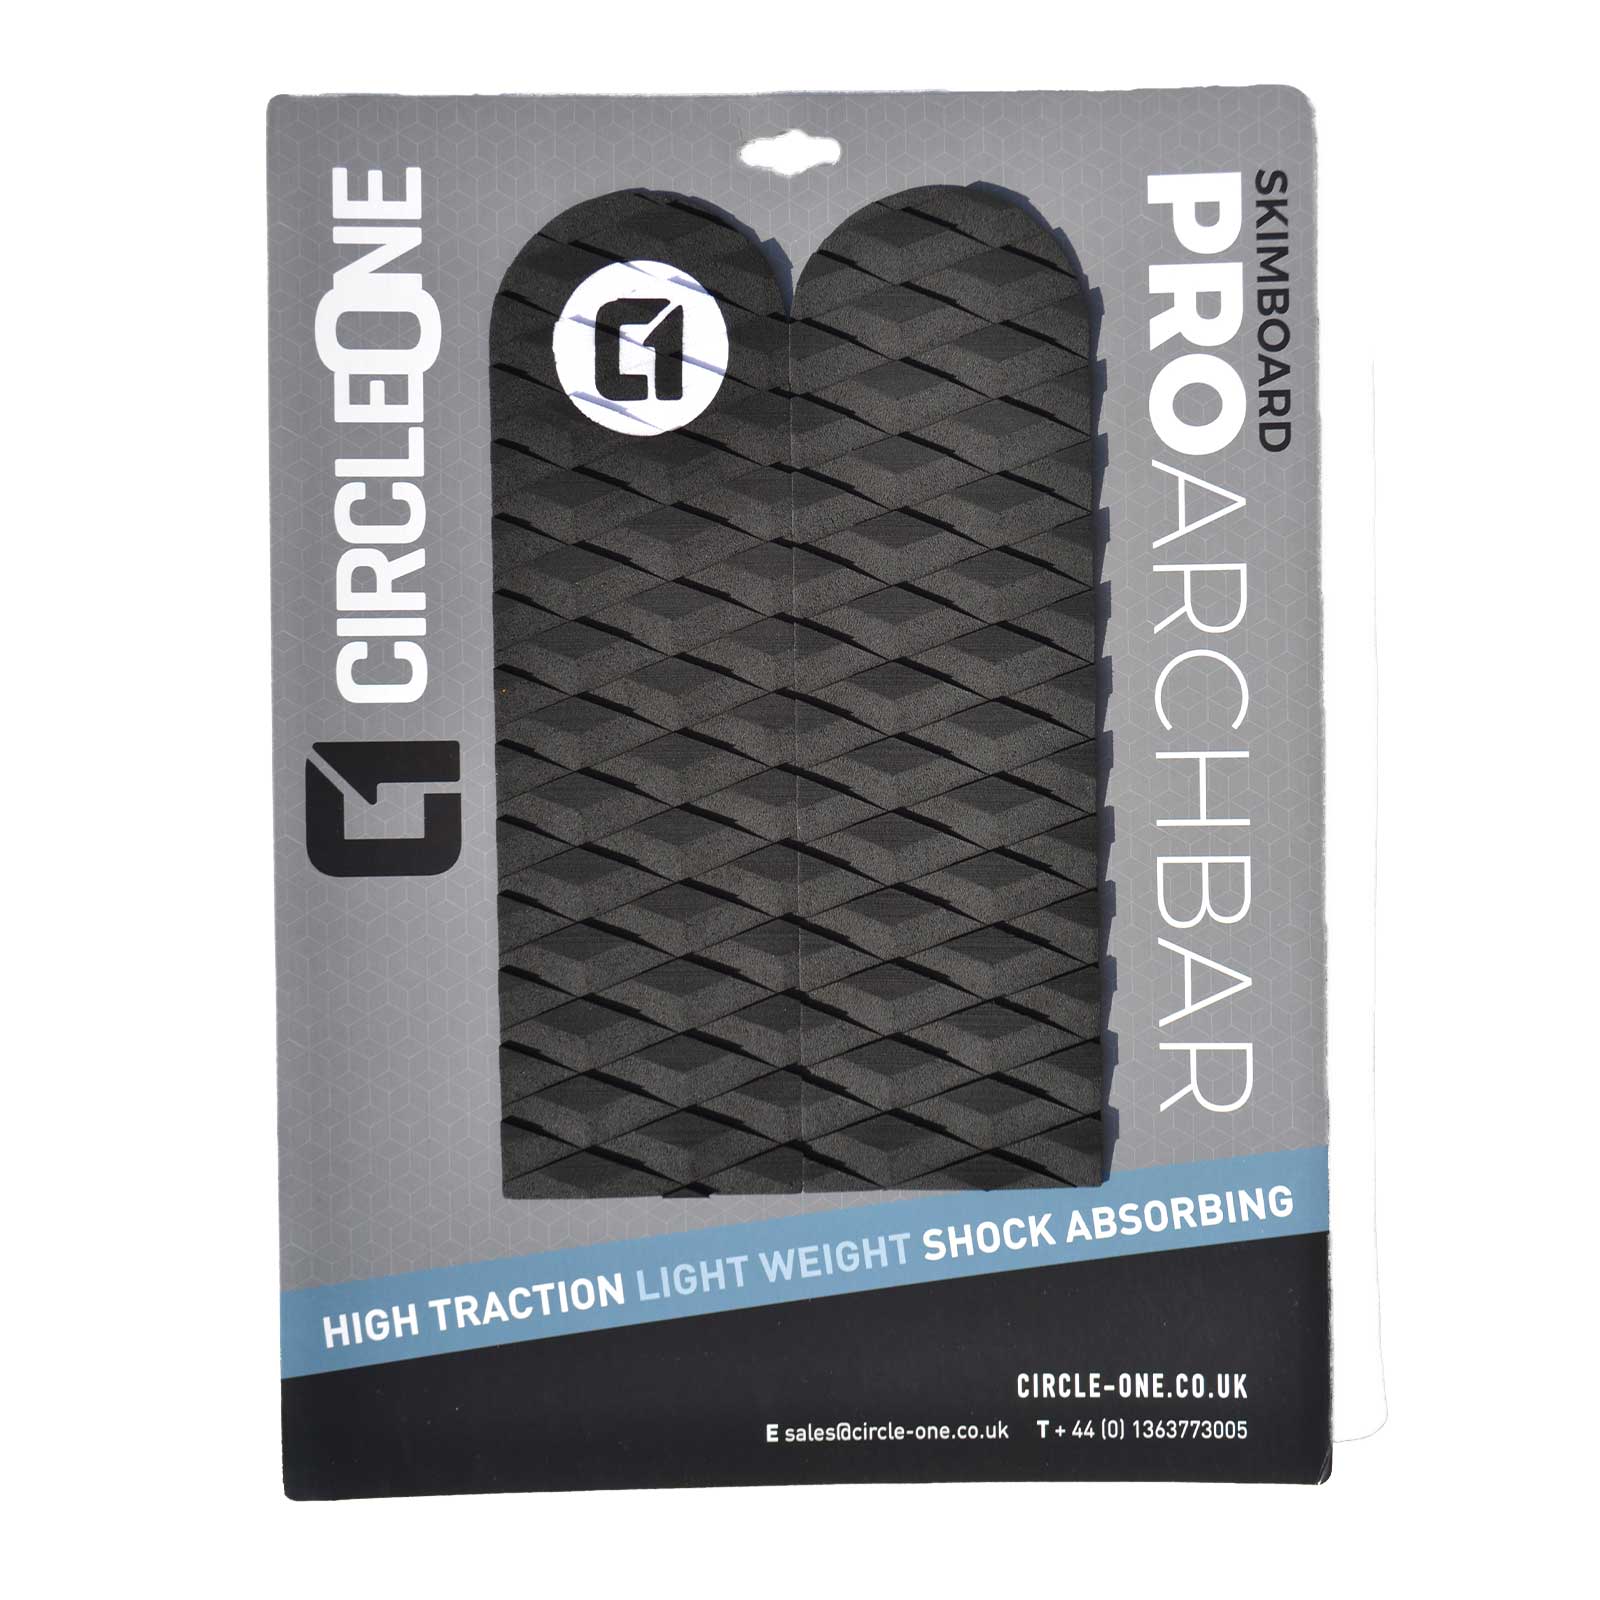 Skimboard Arch Bar Traction Pad - 2 Piece